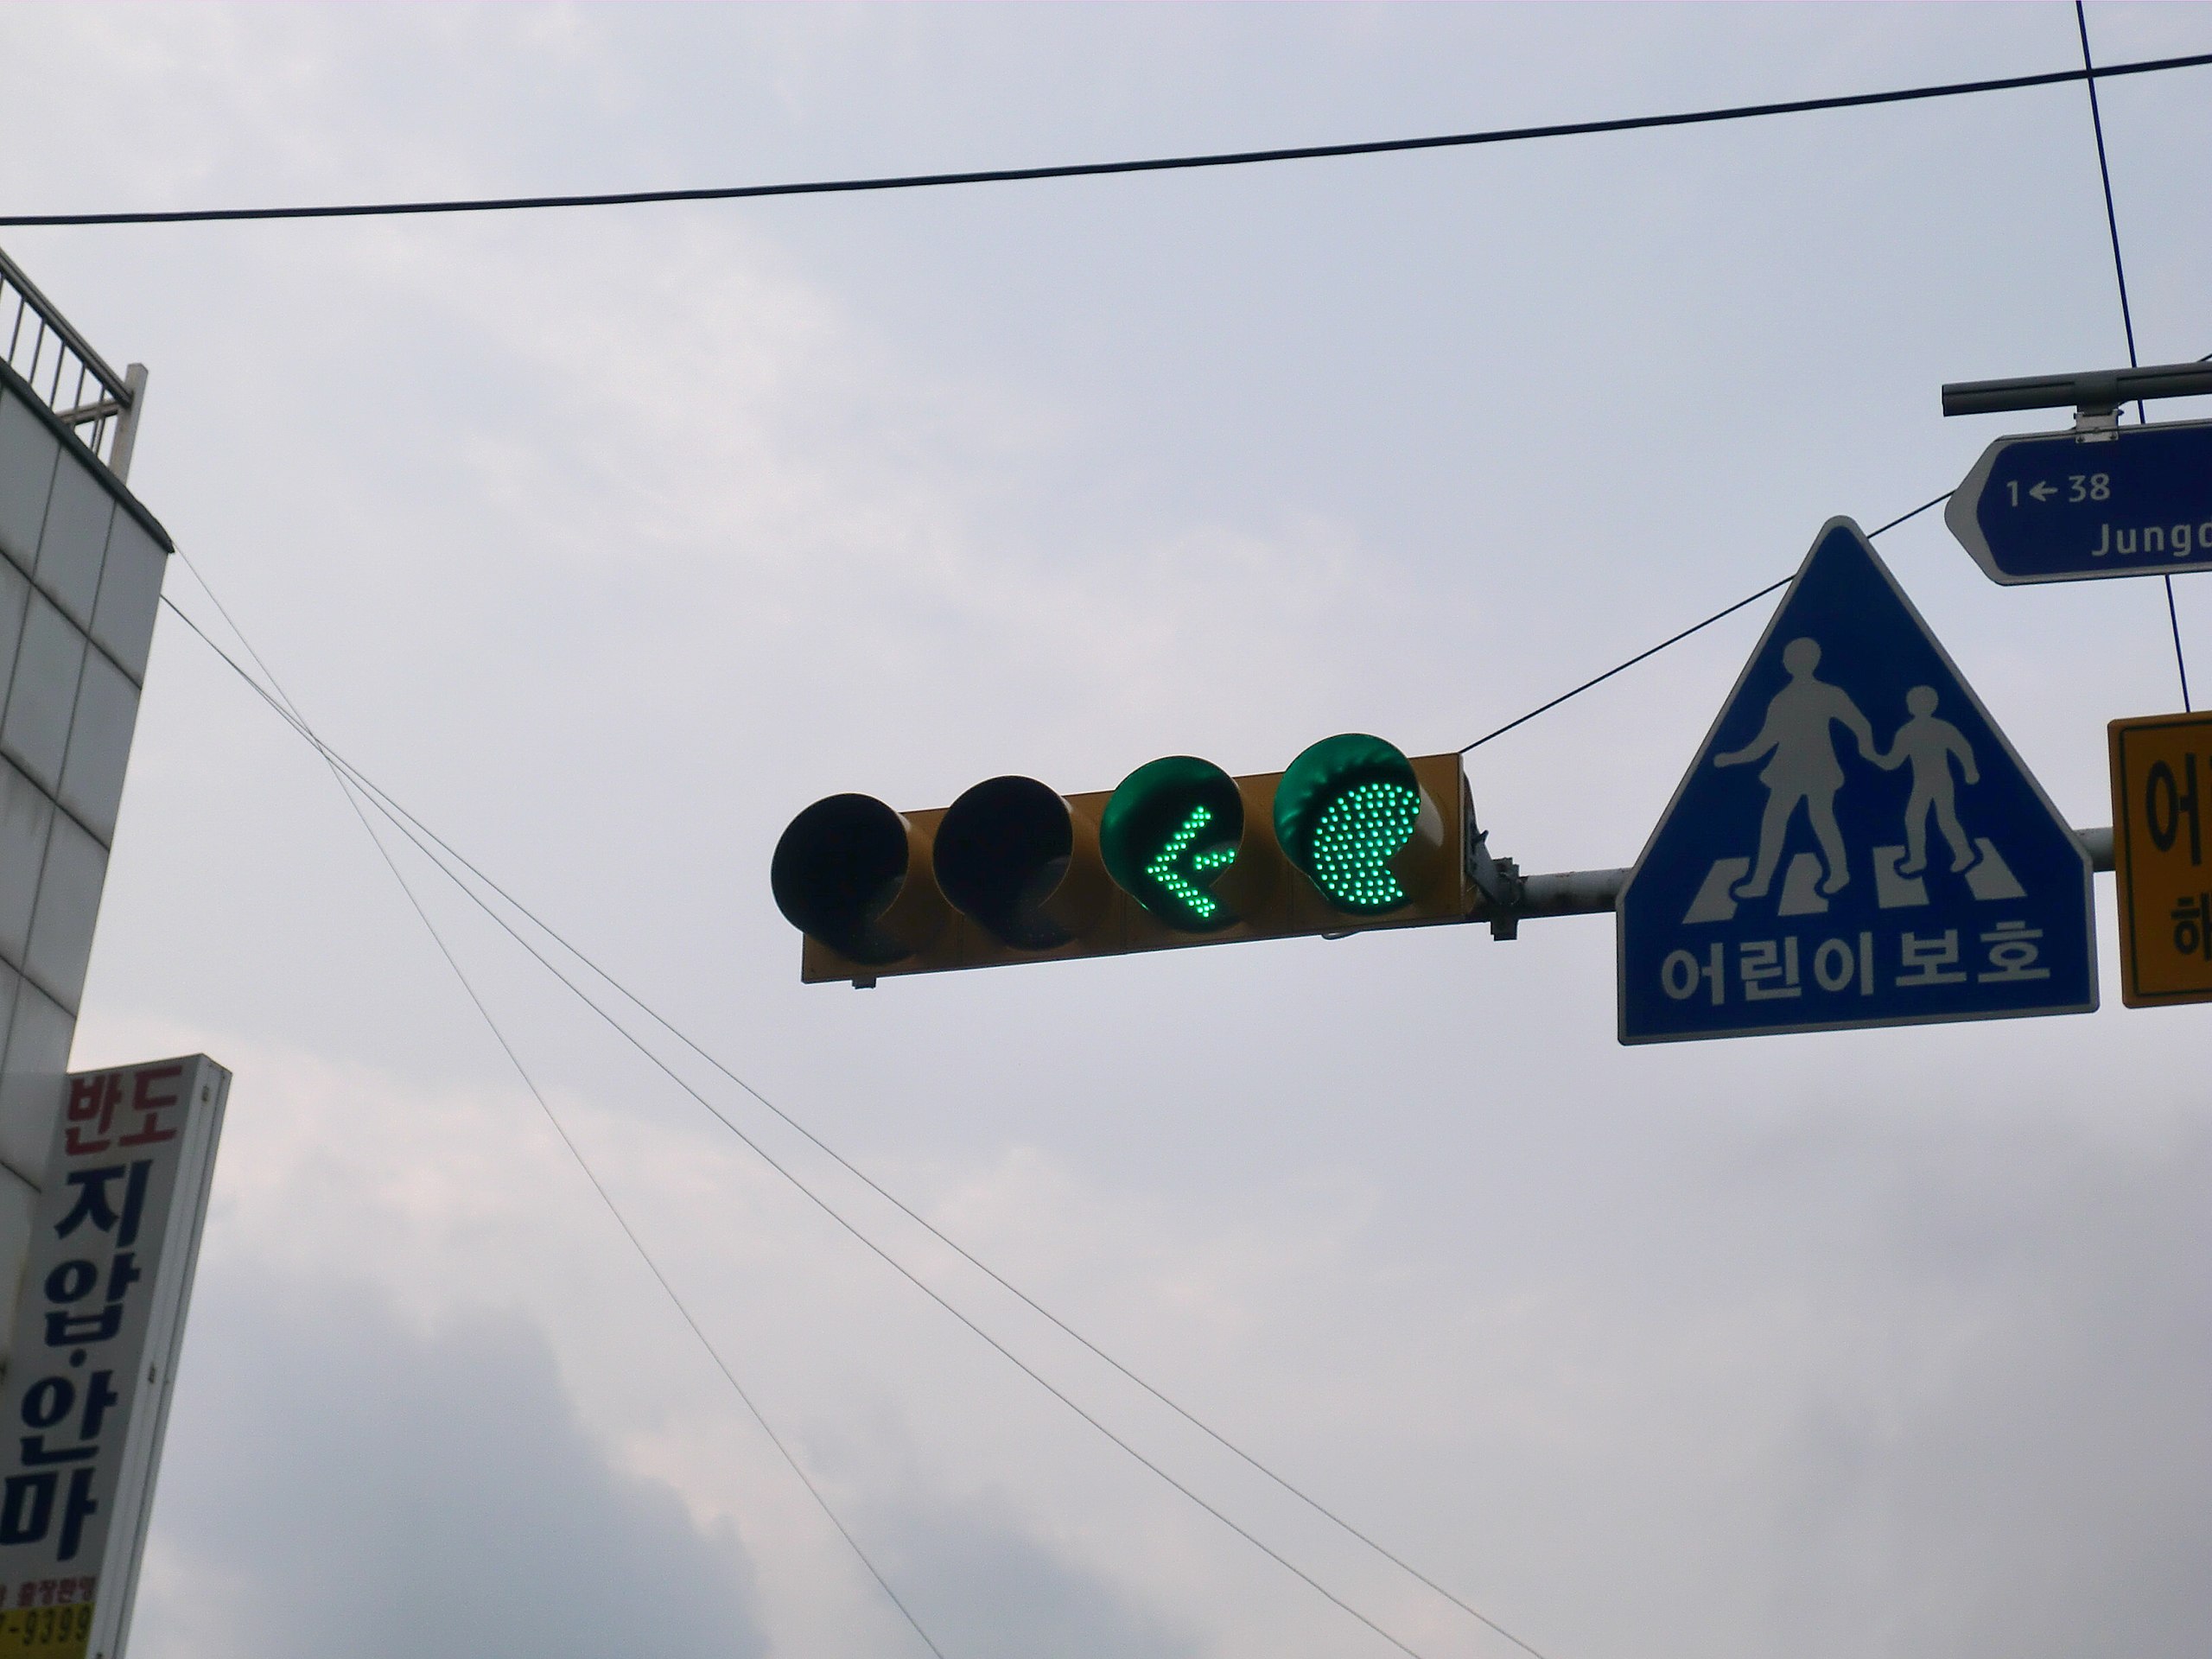 2560px-Signal_korea_4green_and_left_Turn